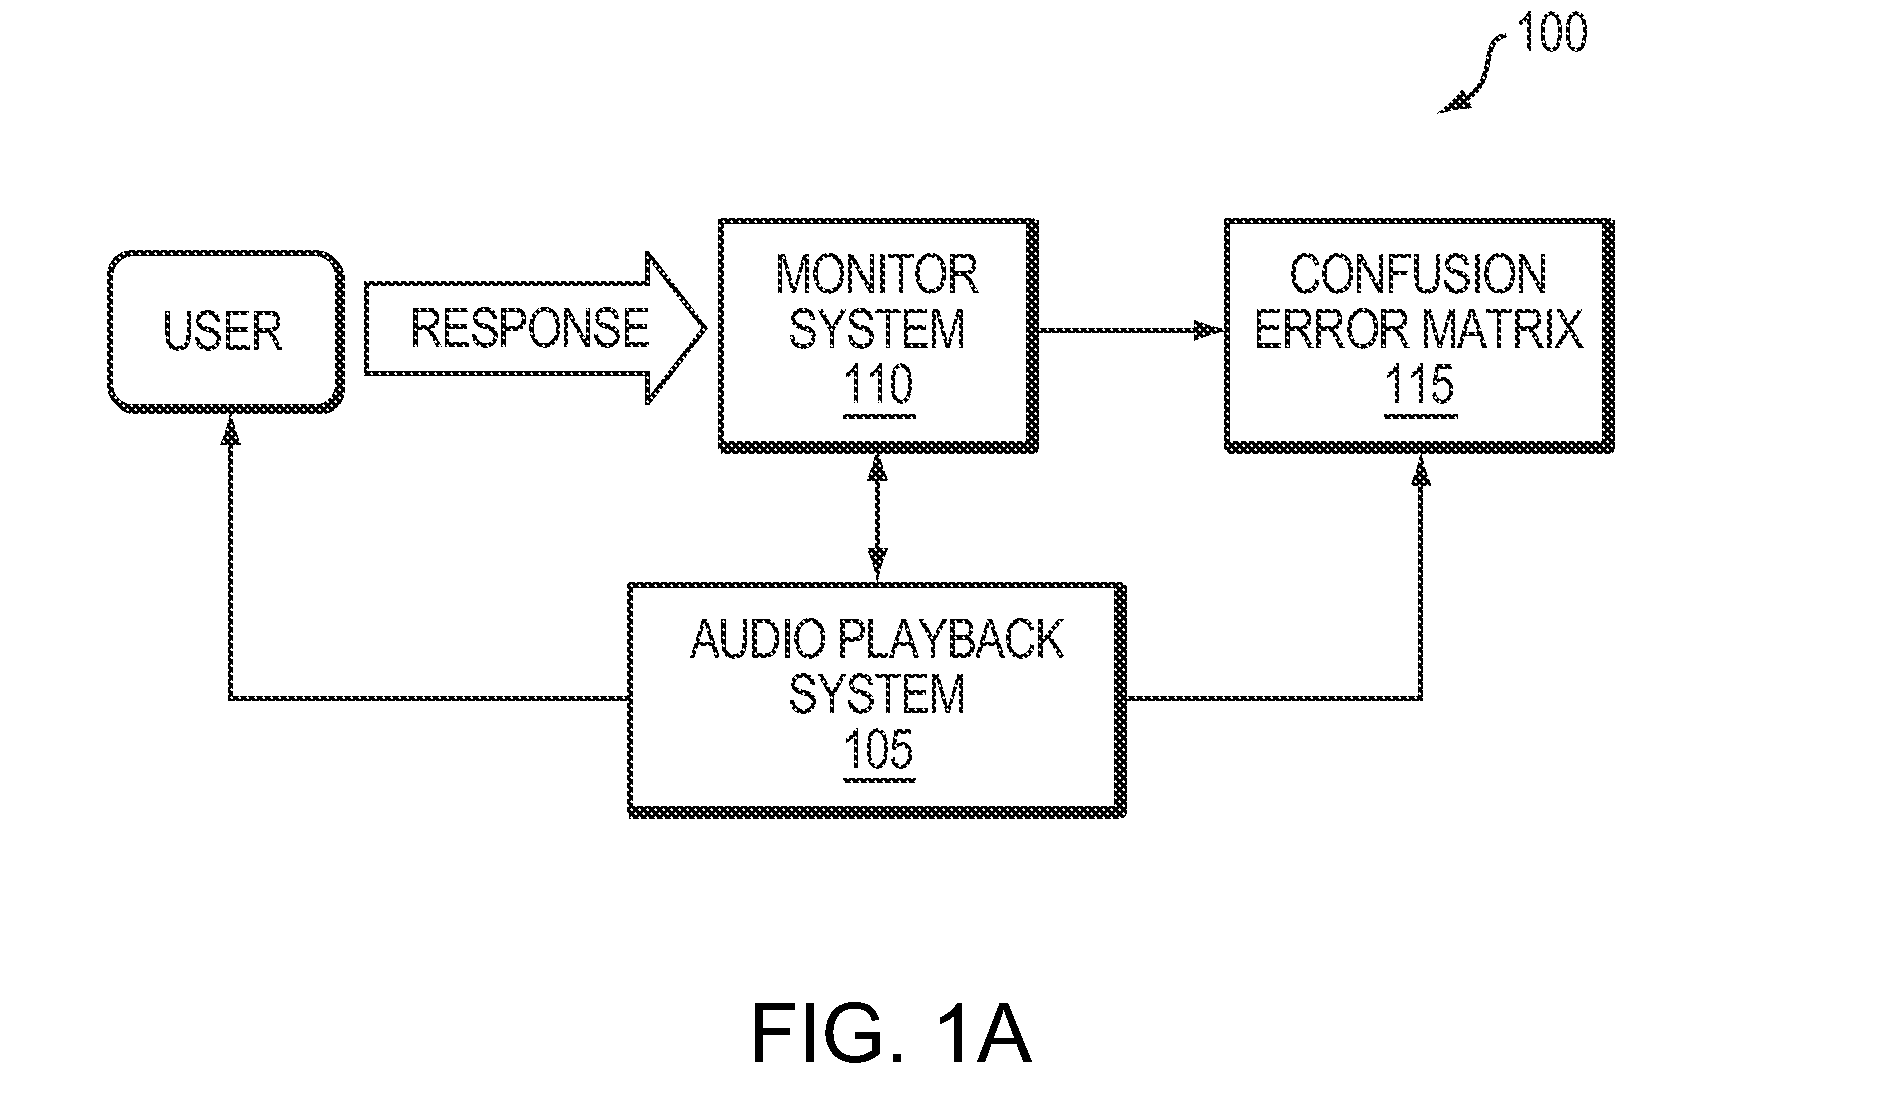 Systems and Methods for Tuning Automatic Speech Recognition Systems